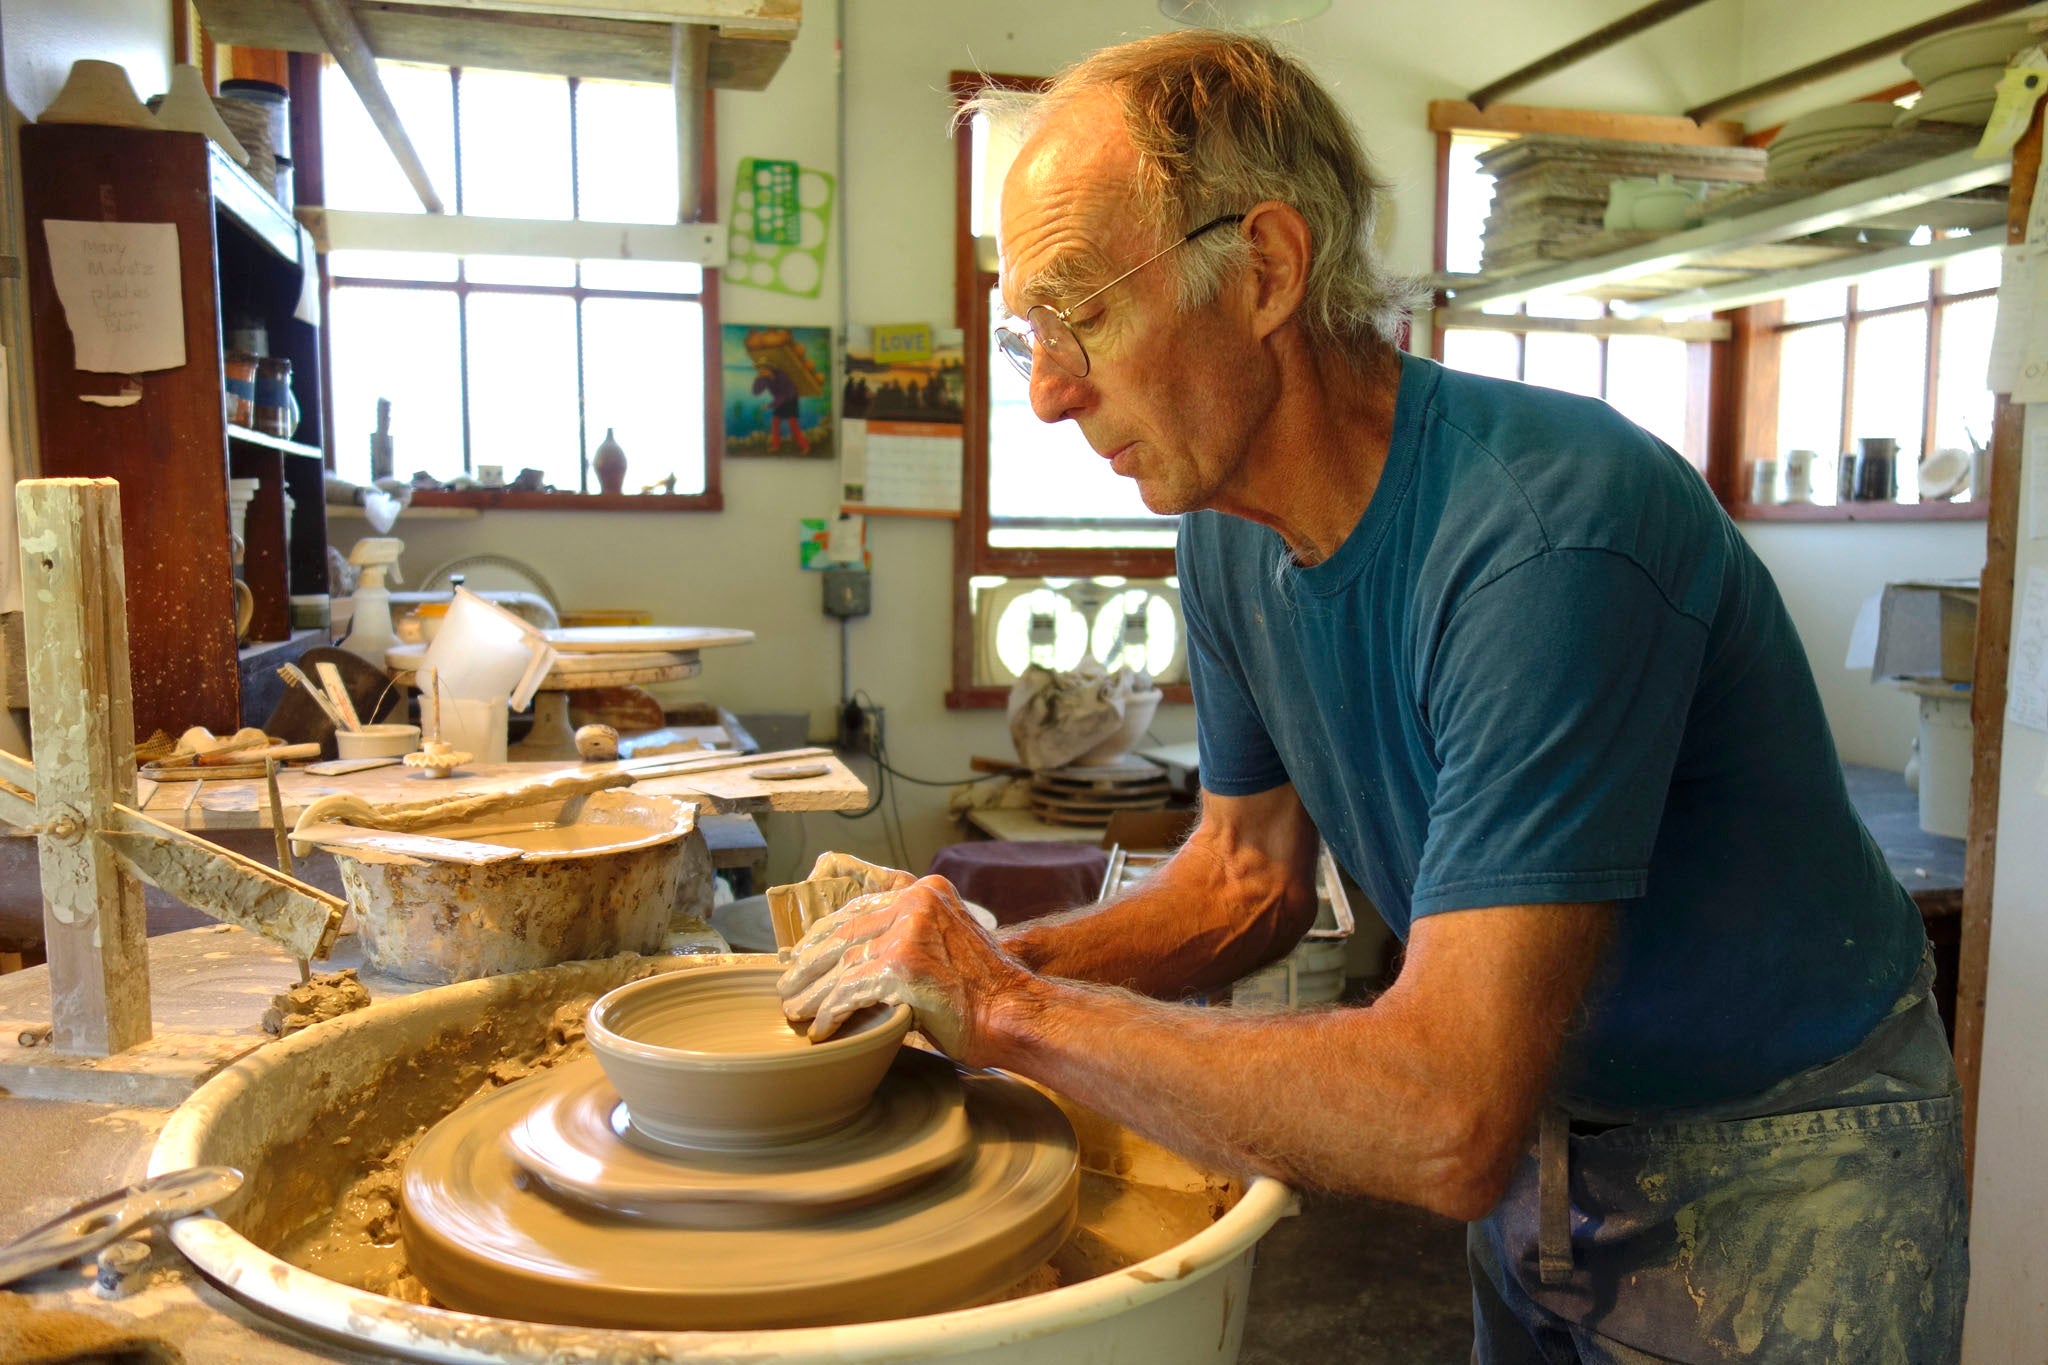 Dunn County Pottery by John Thomas in Downsville WI